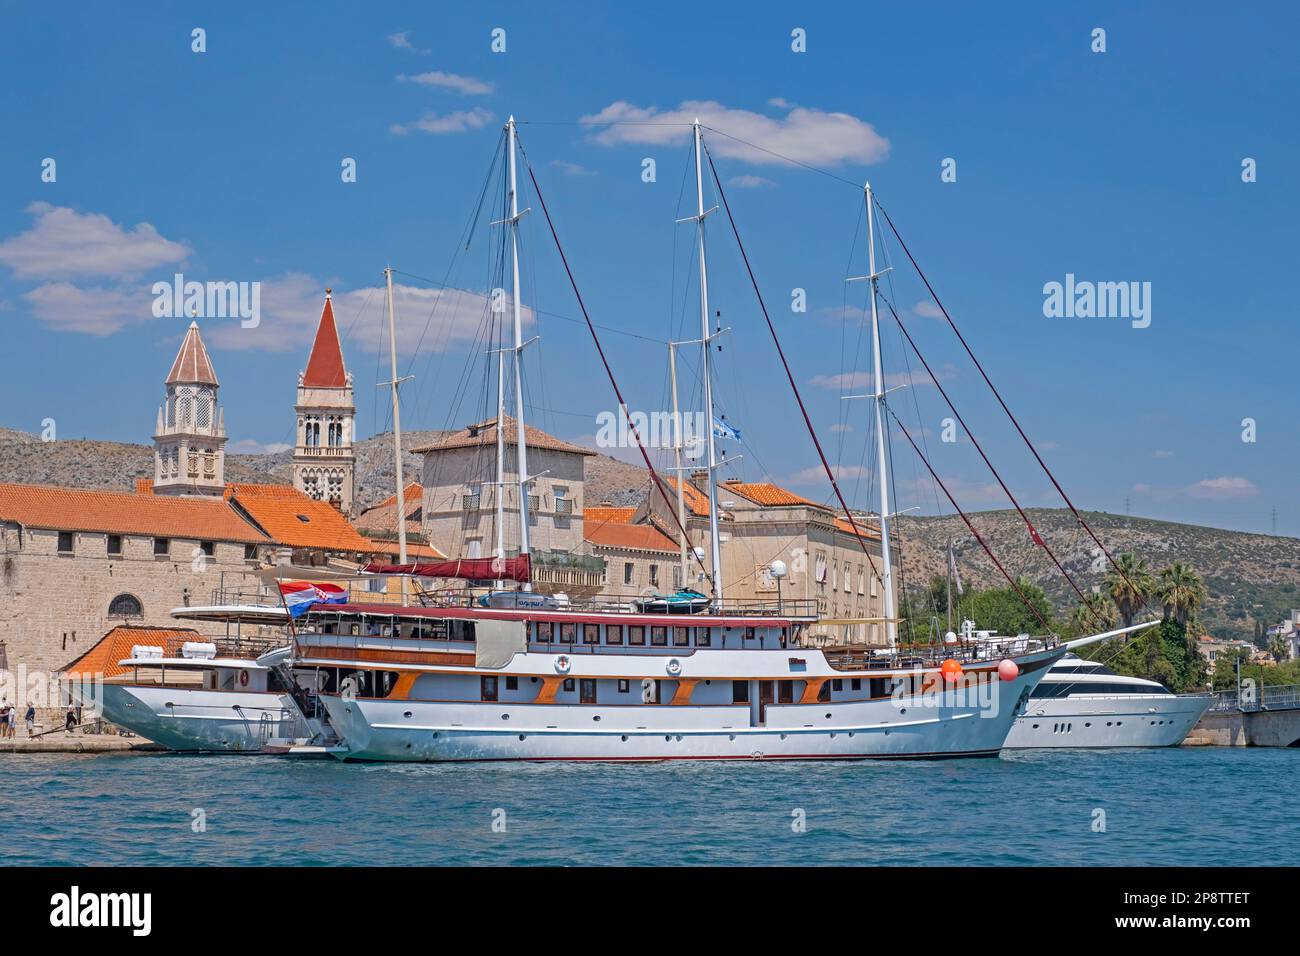 Large sailing ships / yachts moored in harbour of the historic Old Town of Trogir along the Adriatic Sea, Split-Dalmatia County, Croatia Stock Photo